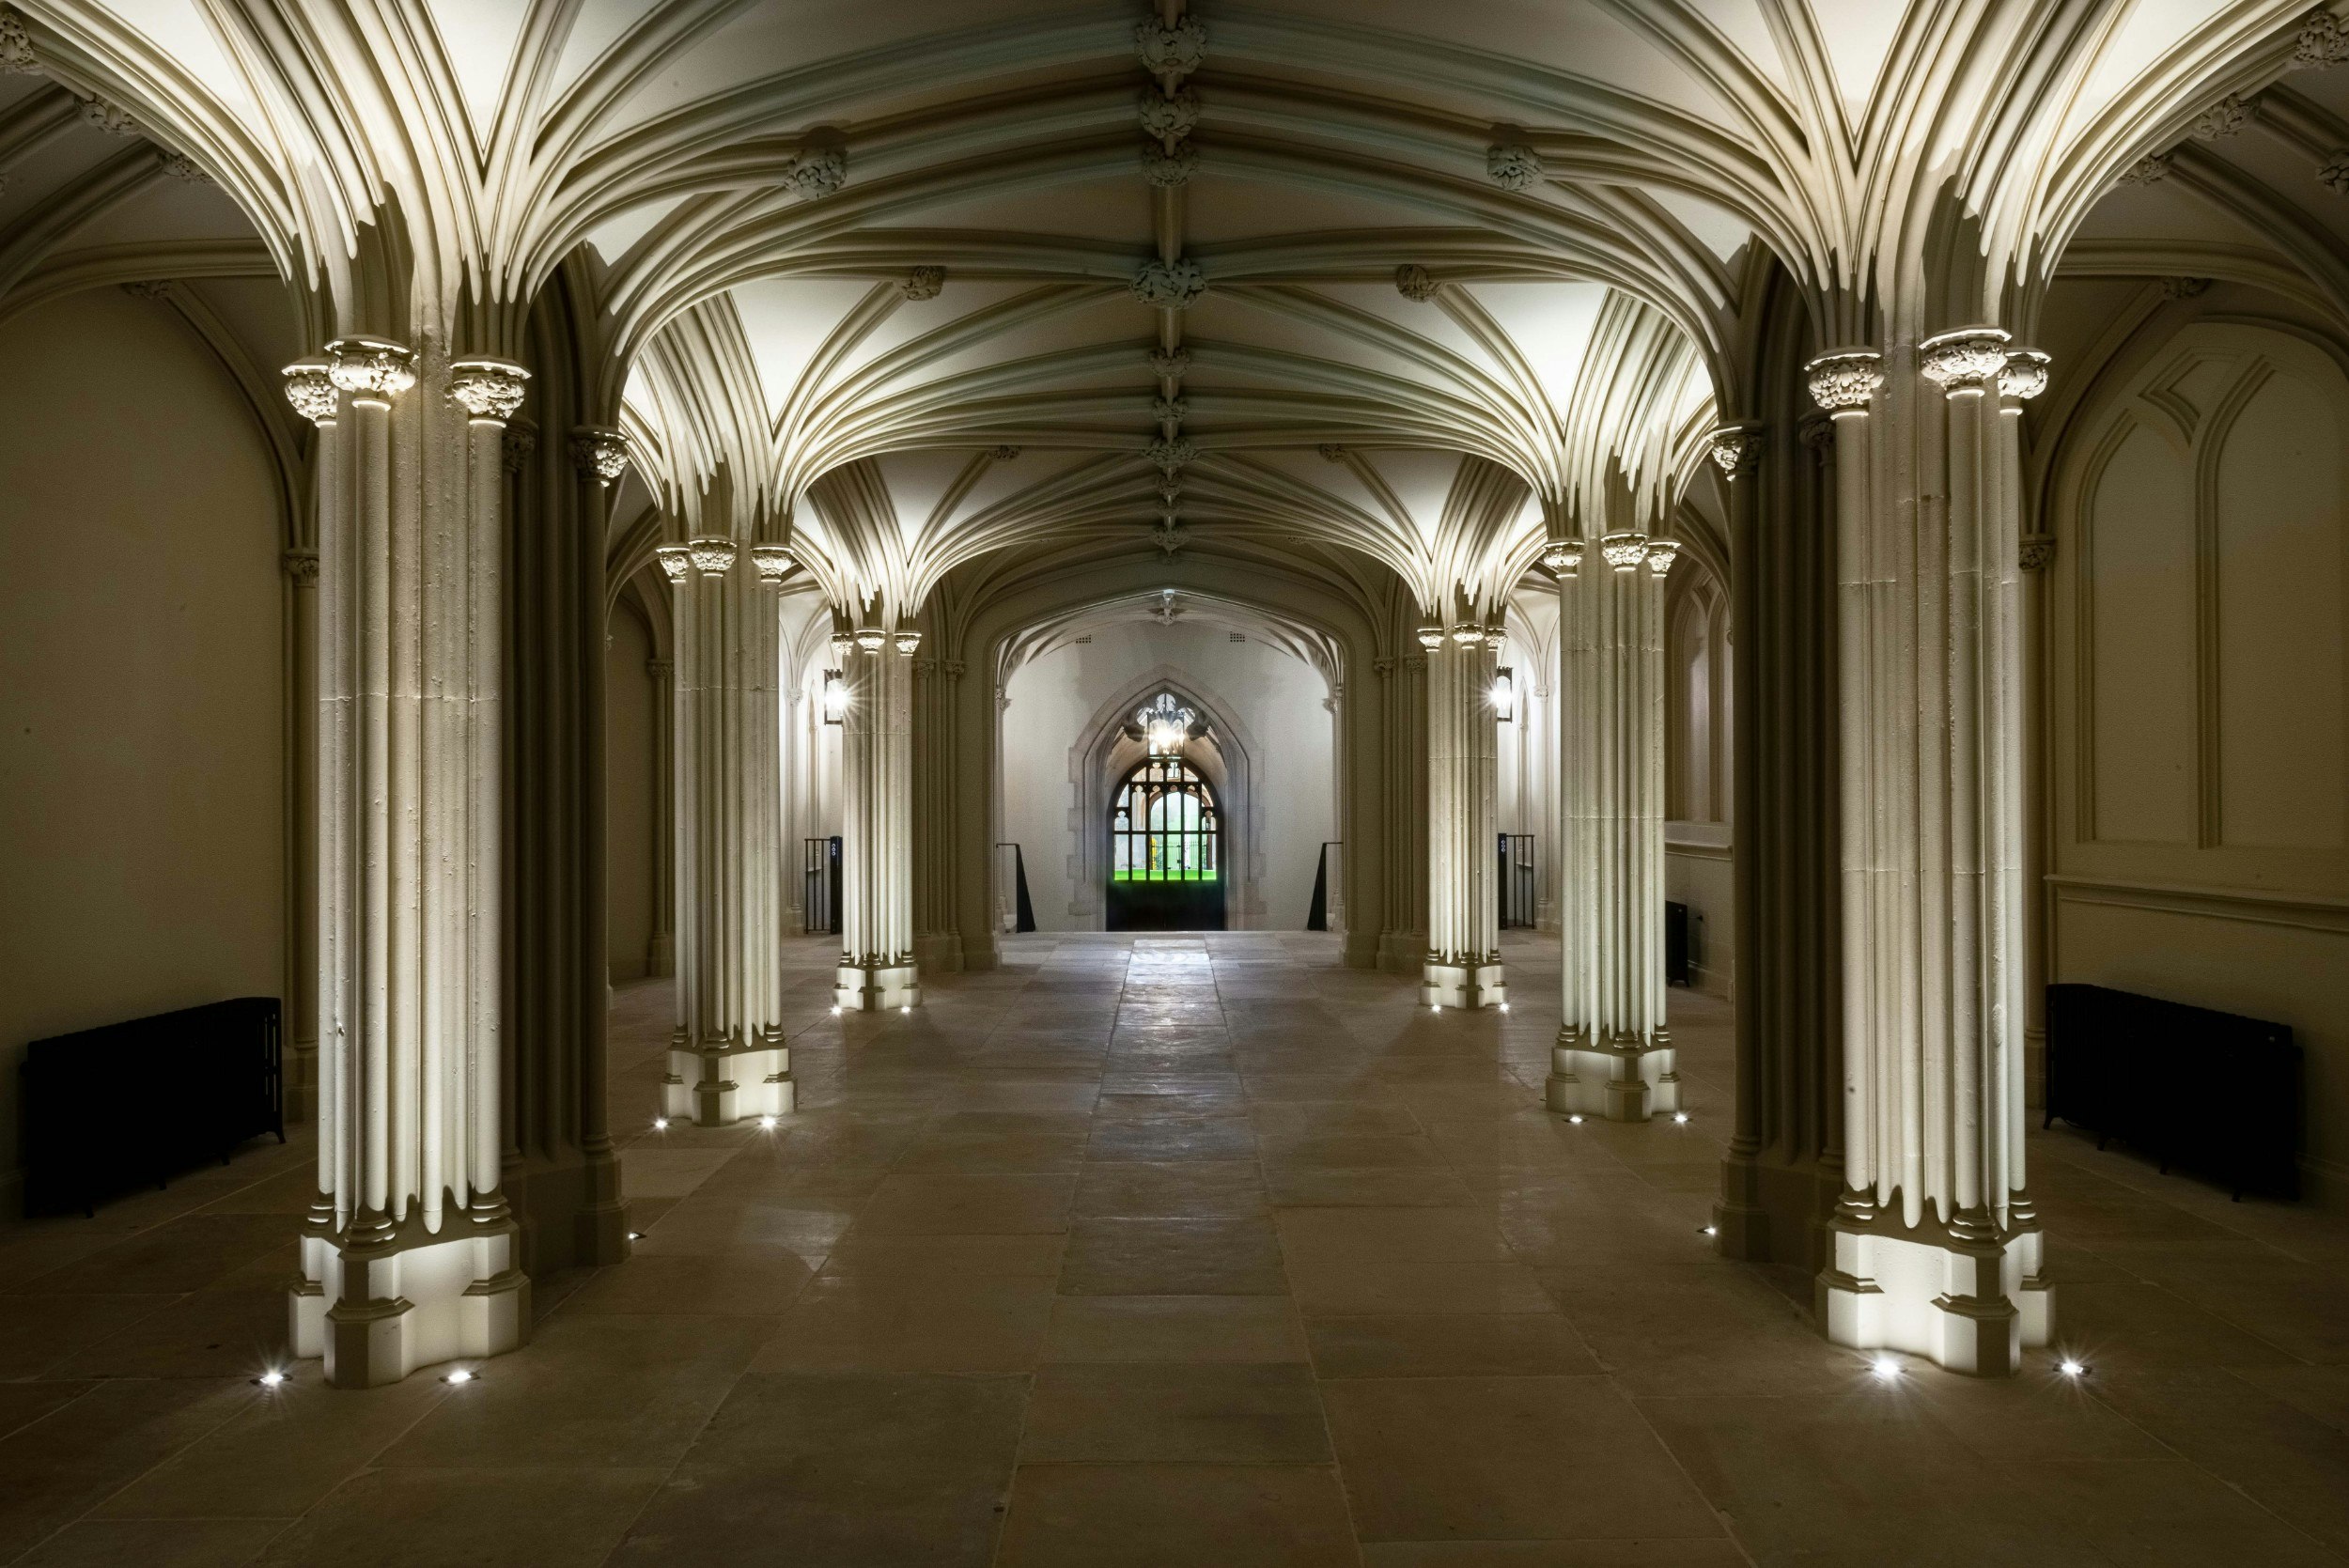 The Inner Hall at Windsor Castle